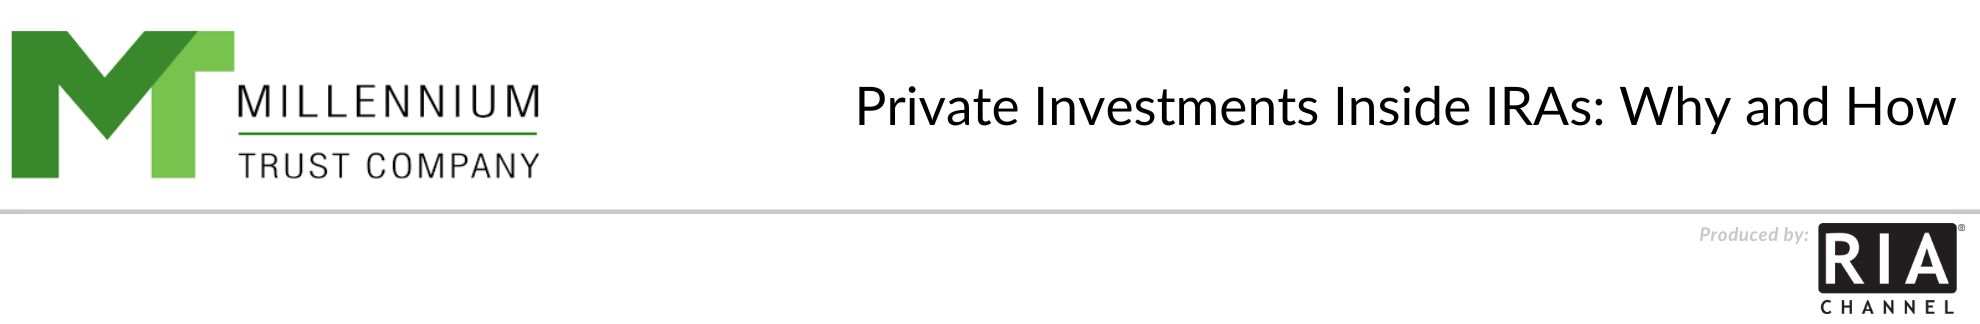 Private Investments Inside IRAs: Why and How